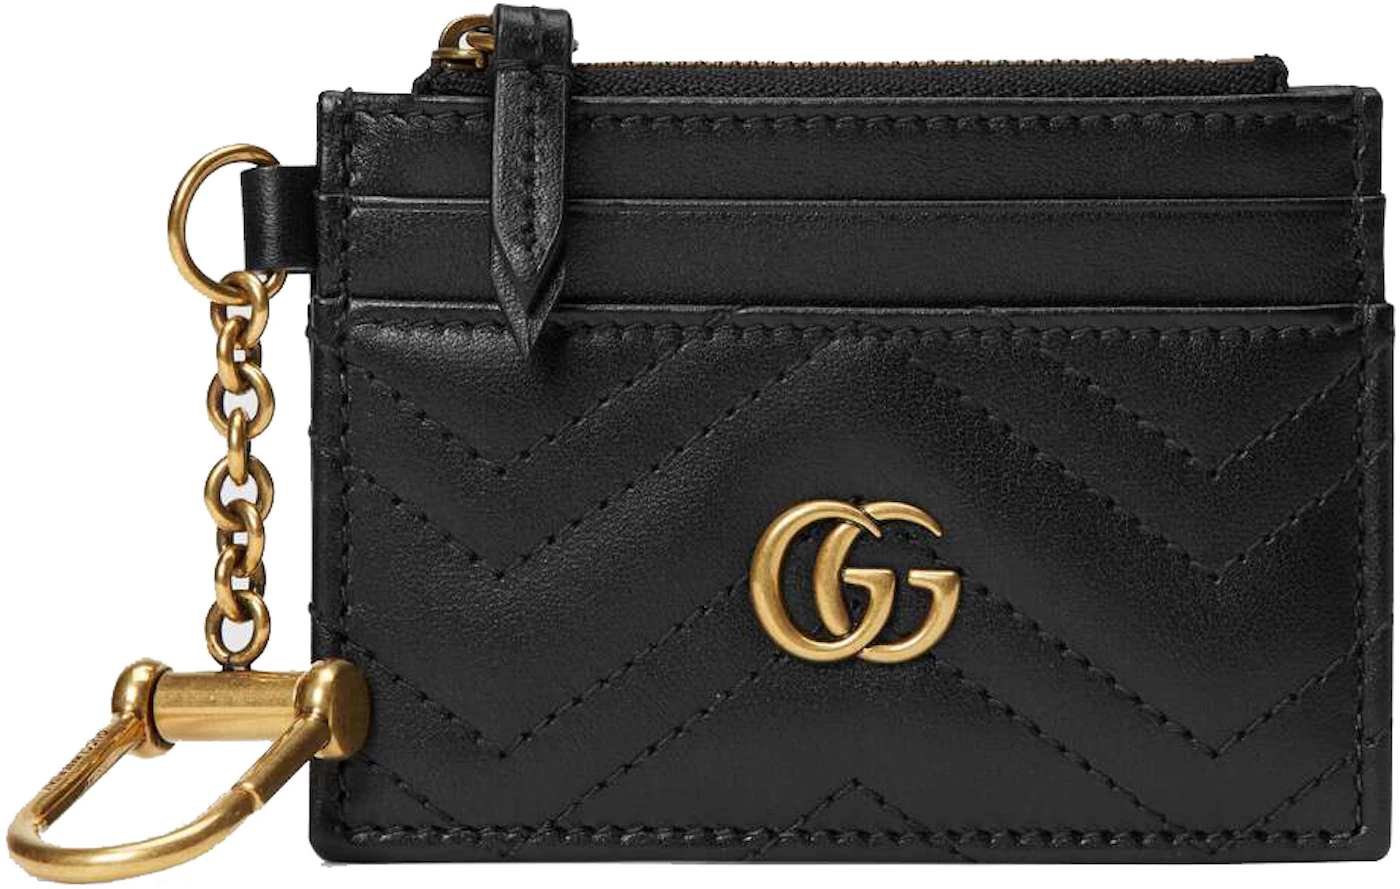 Gucci Black Marmont Wallet on a Chain - Ann's Fabulous Closeouts